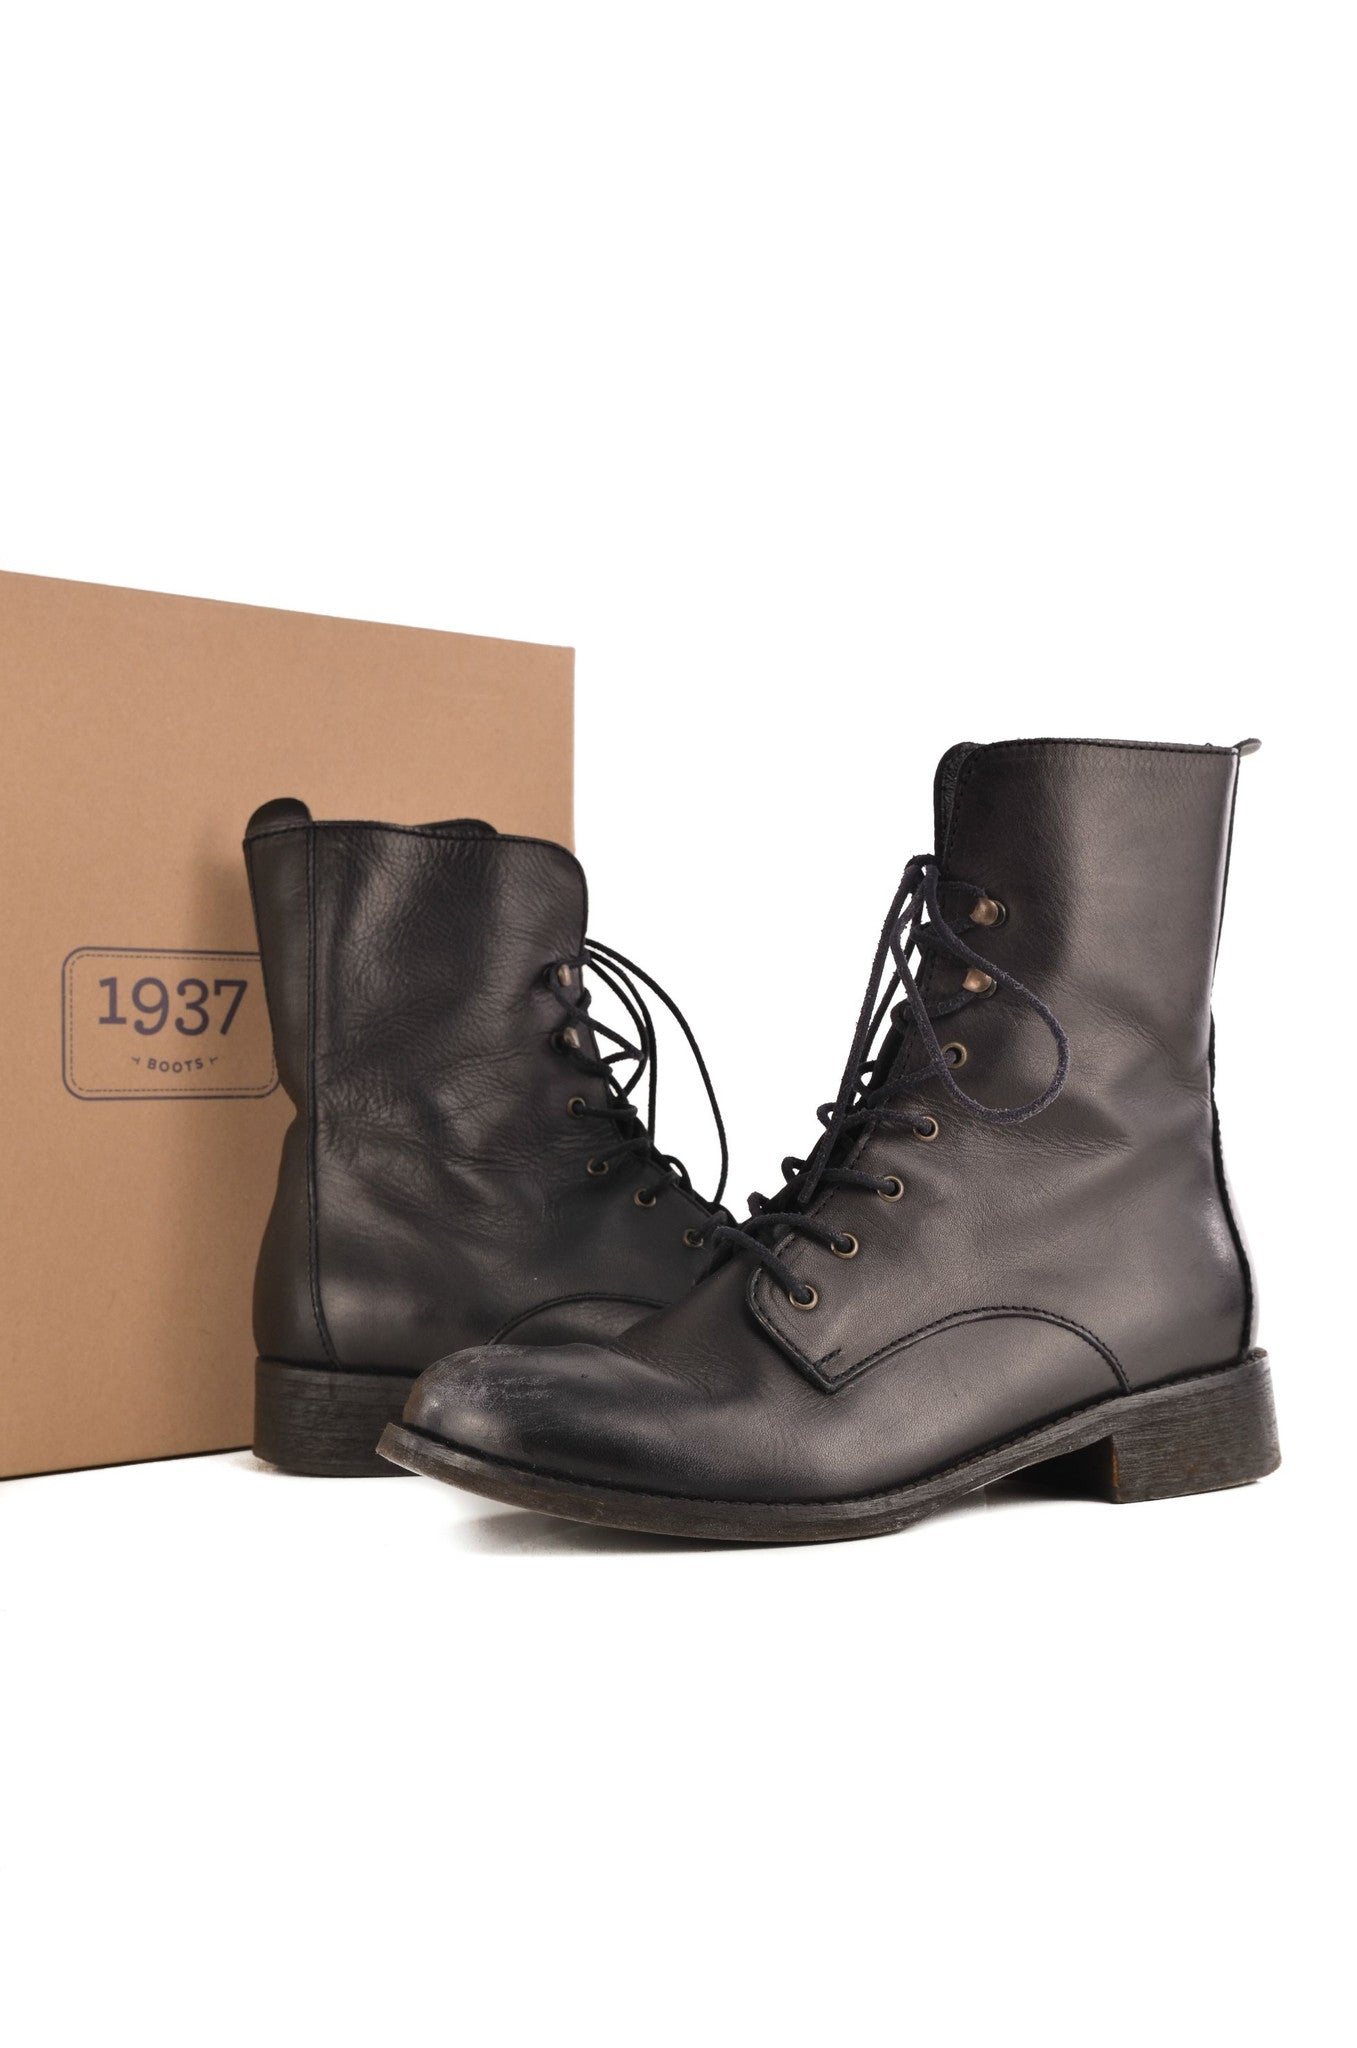 madewell 1937 boots